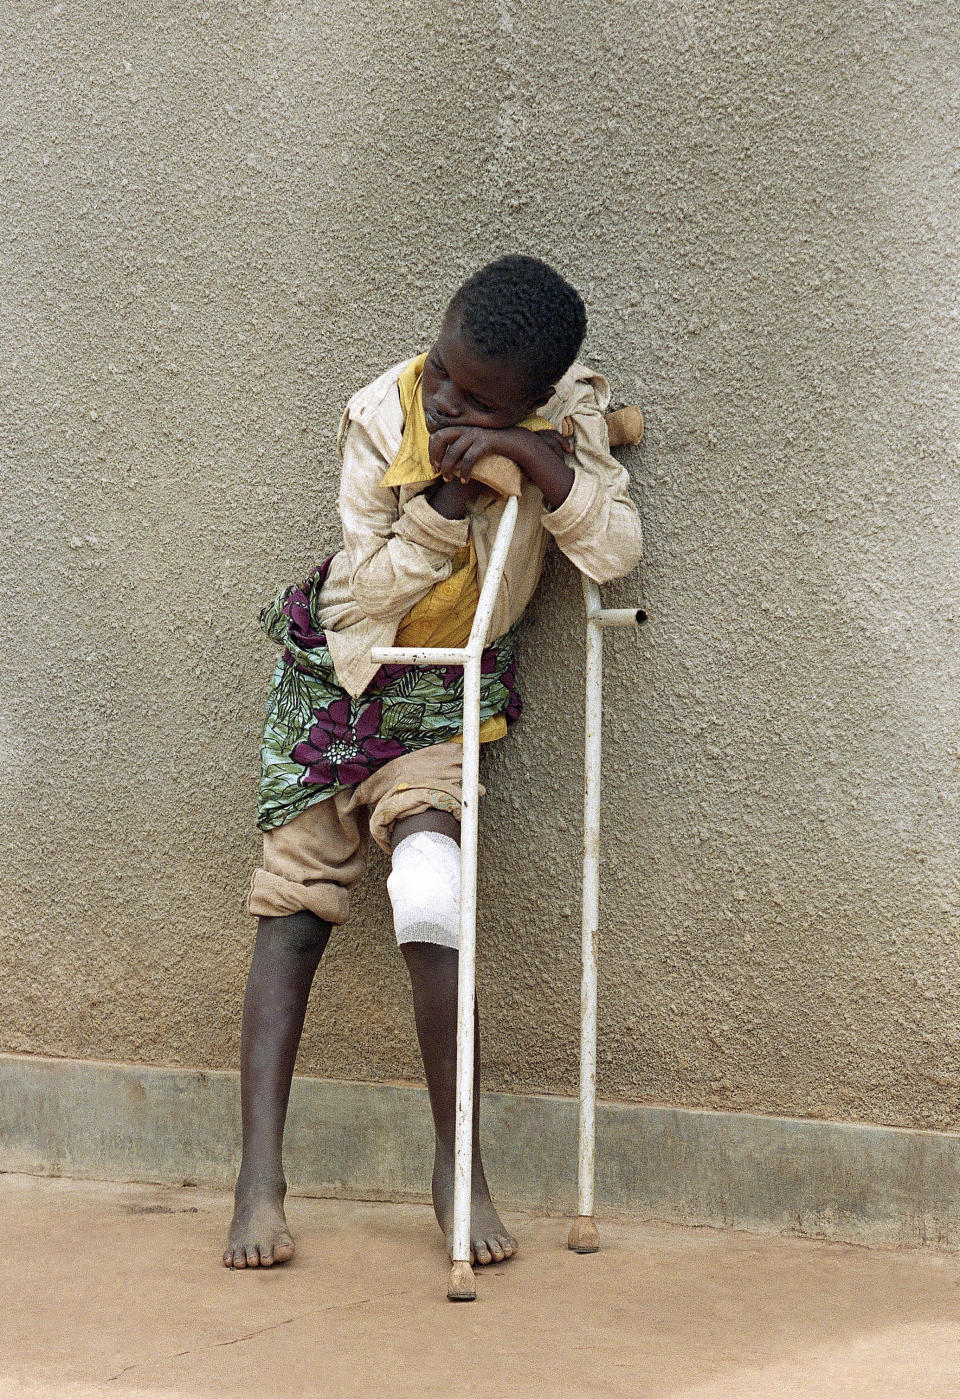 FILE - A boy who survived a massacre in the village of Karubamba in April and whose leg was wounded by a machete, rests on his crutches at a hospital near Gahini, in Rwanda, May 13, 1994. The massacres, mostly by gangs wielding machetes, swept across Rwanda and groups of people were killed in their homes and farms and where they sought shelter in churches and schools. (AP Photo/Jean-Marc Bouju, File)